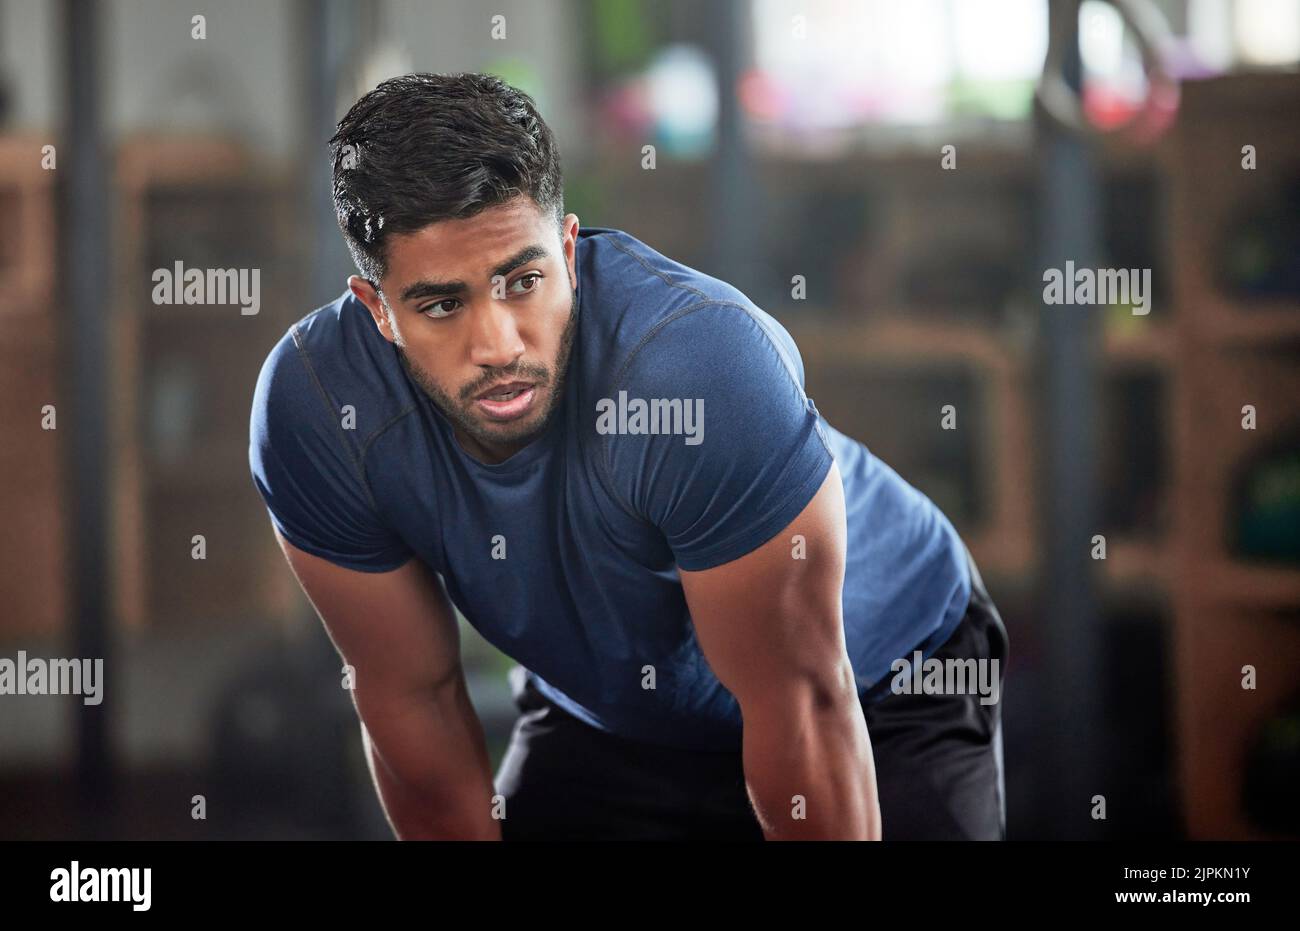 Tired, breathing and fitness gym man taking a break from workout, training or exercising inside a wellness center. Young athletic, masculine guy Stock Photo